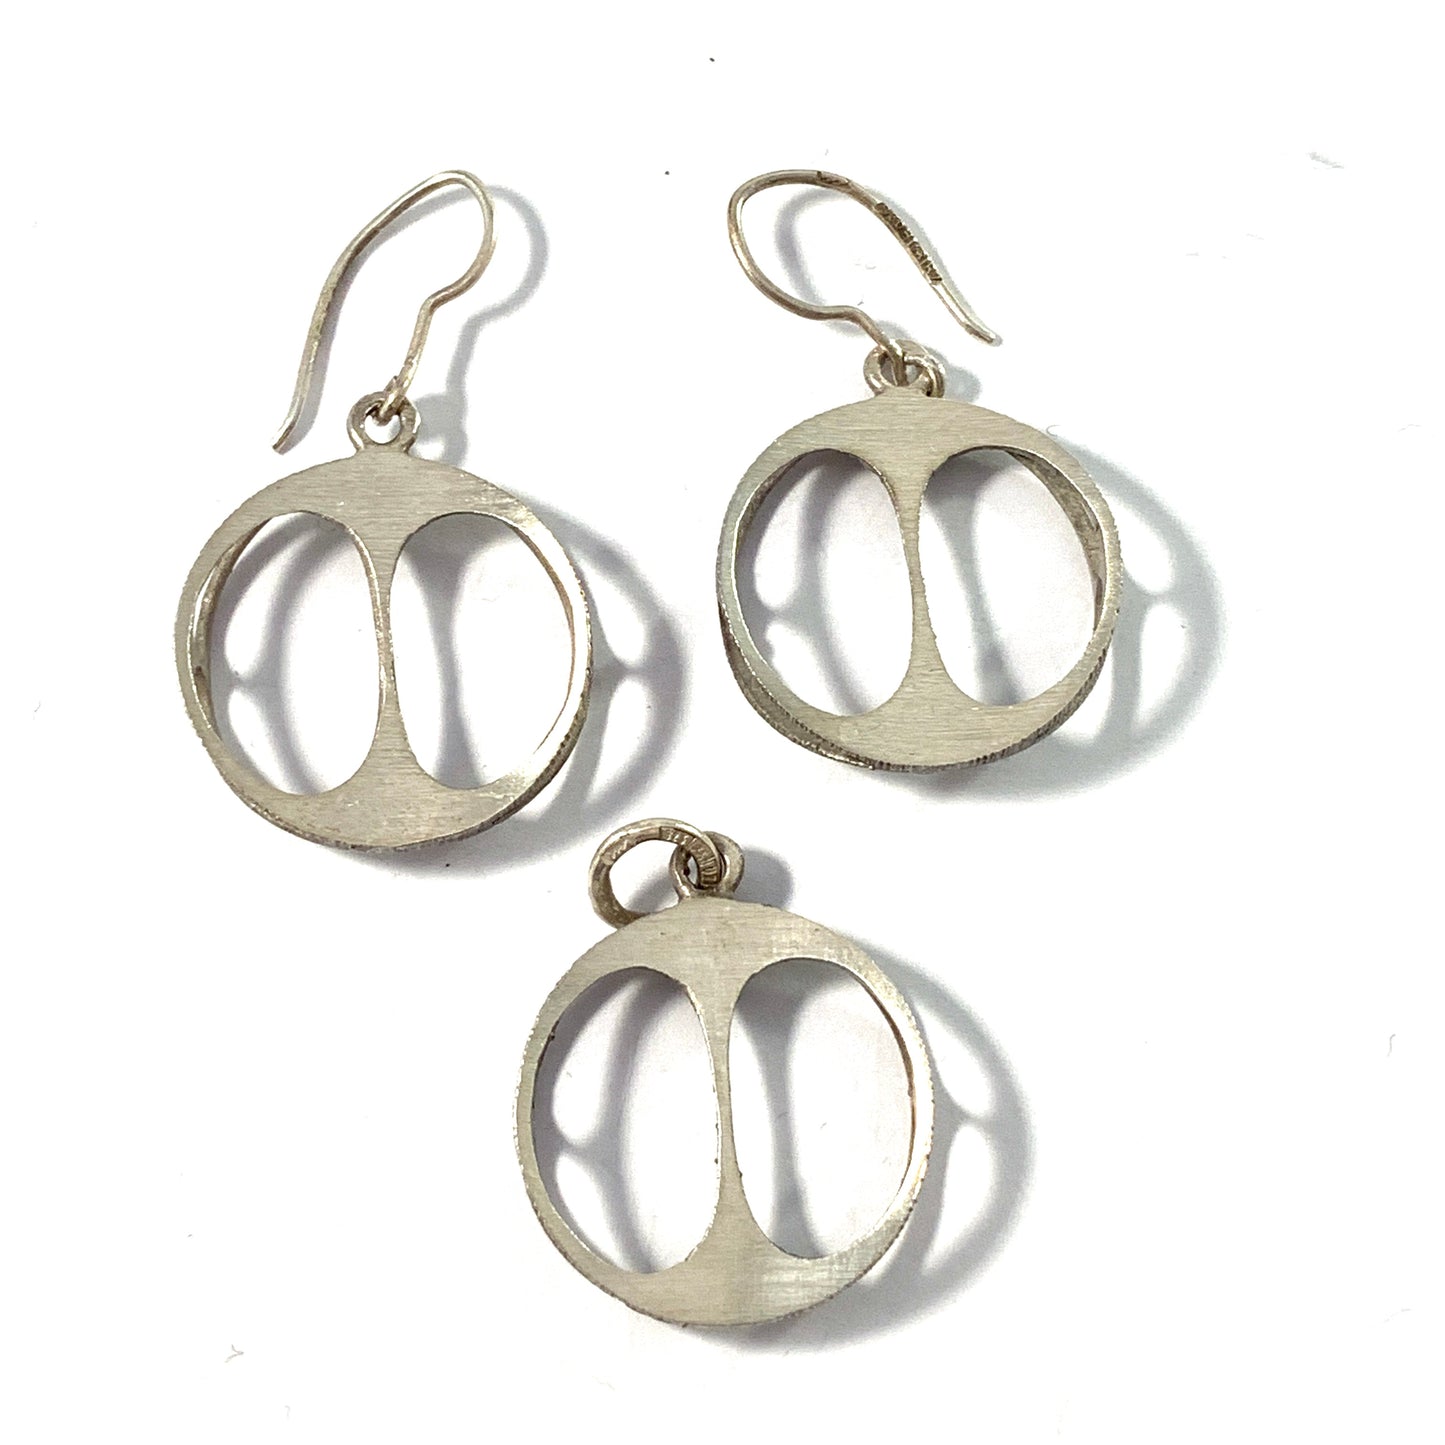 Karl Laine for Sten & Laine Finland 1970-73 Solid Silver Earrings and Pendant.